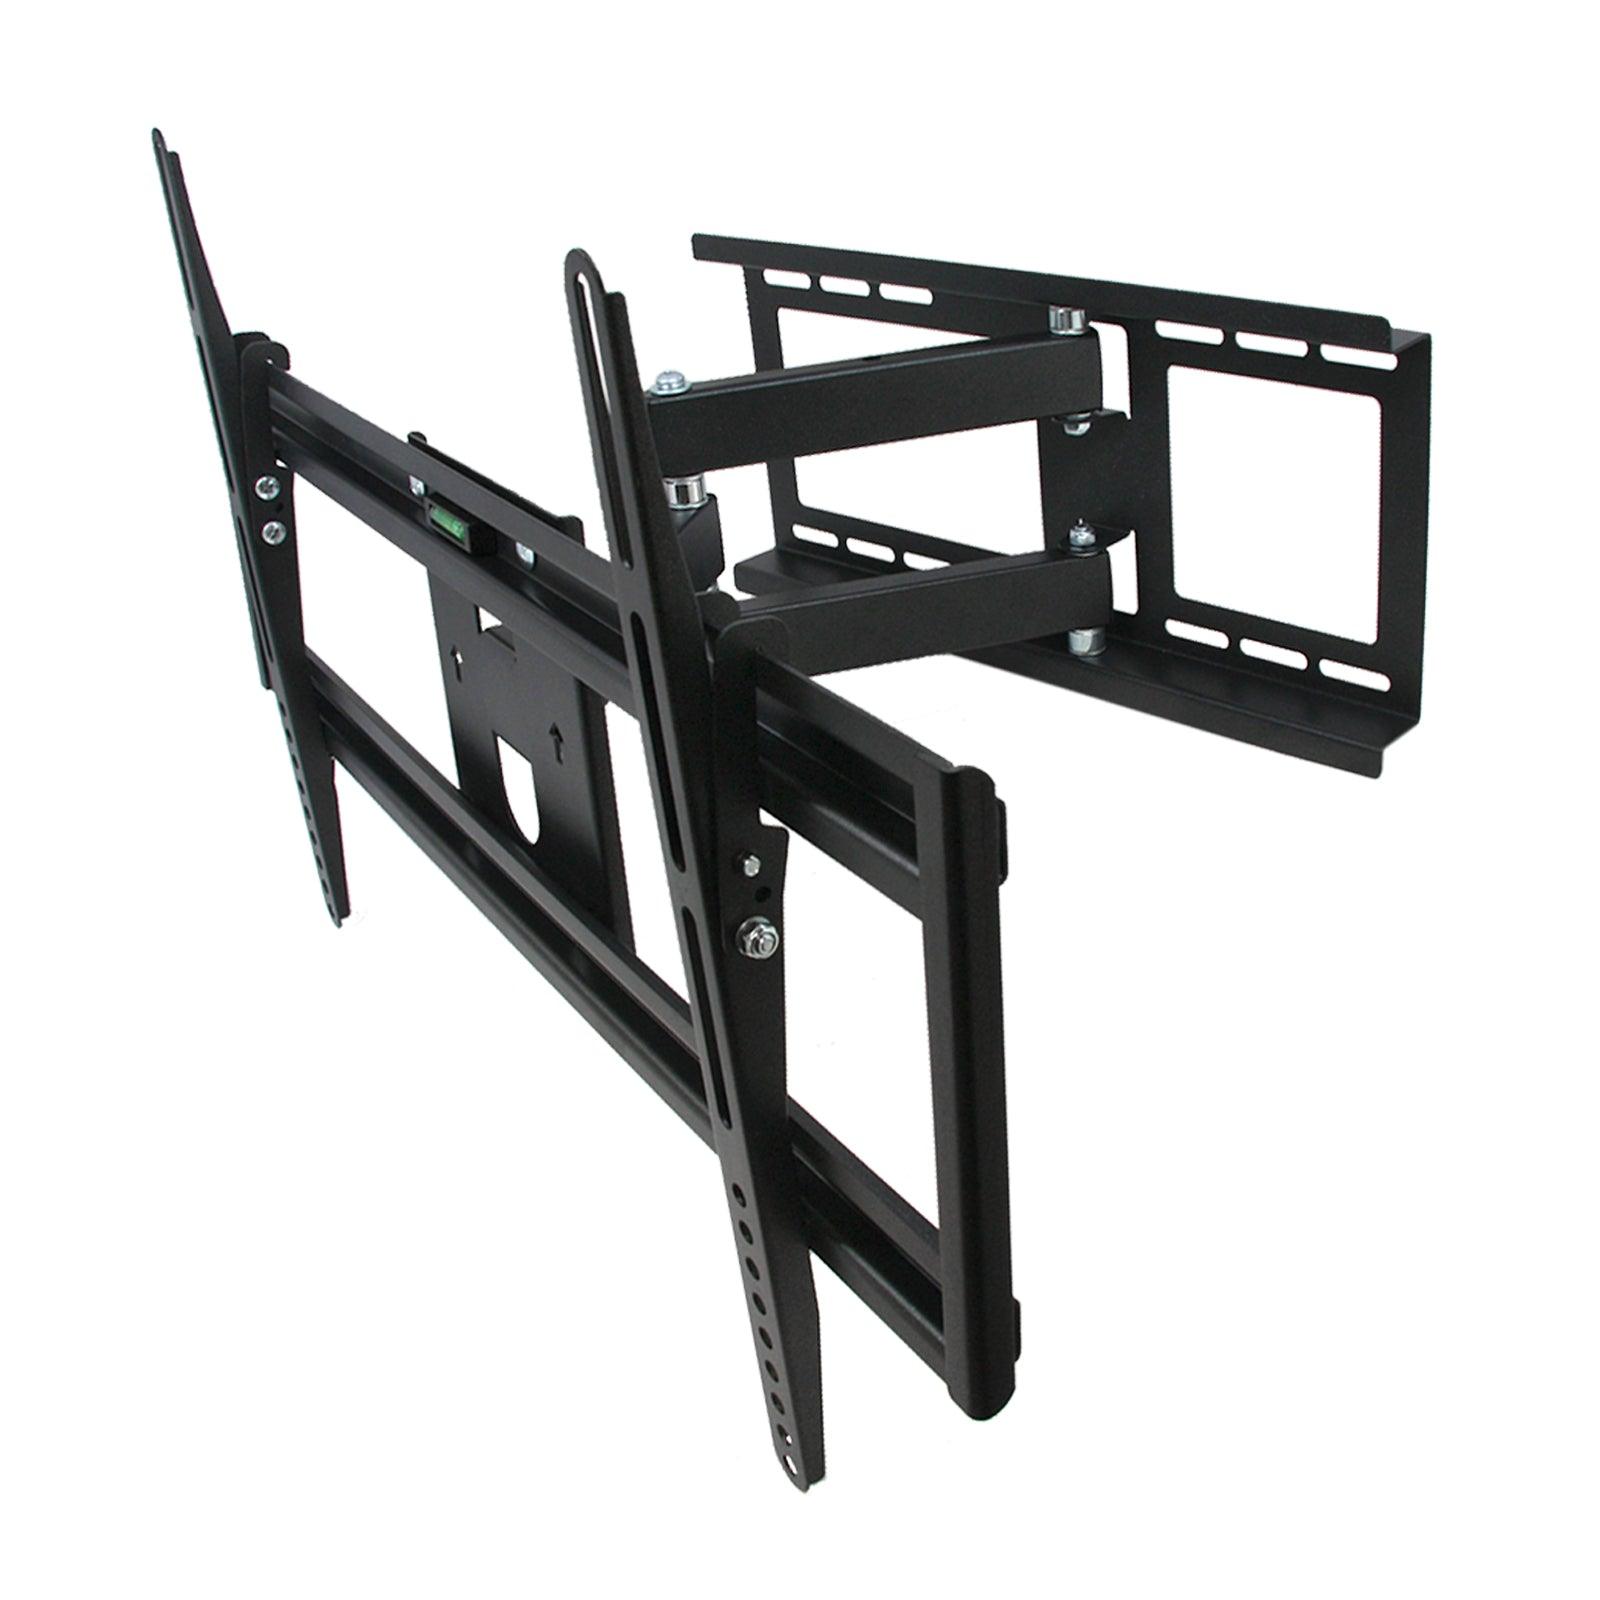 MegaMounts Full Motion Television Wall Mount with Bubble Level for 32-70 Inch Displays FSSA Global B